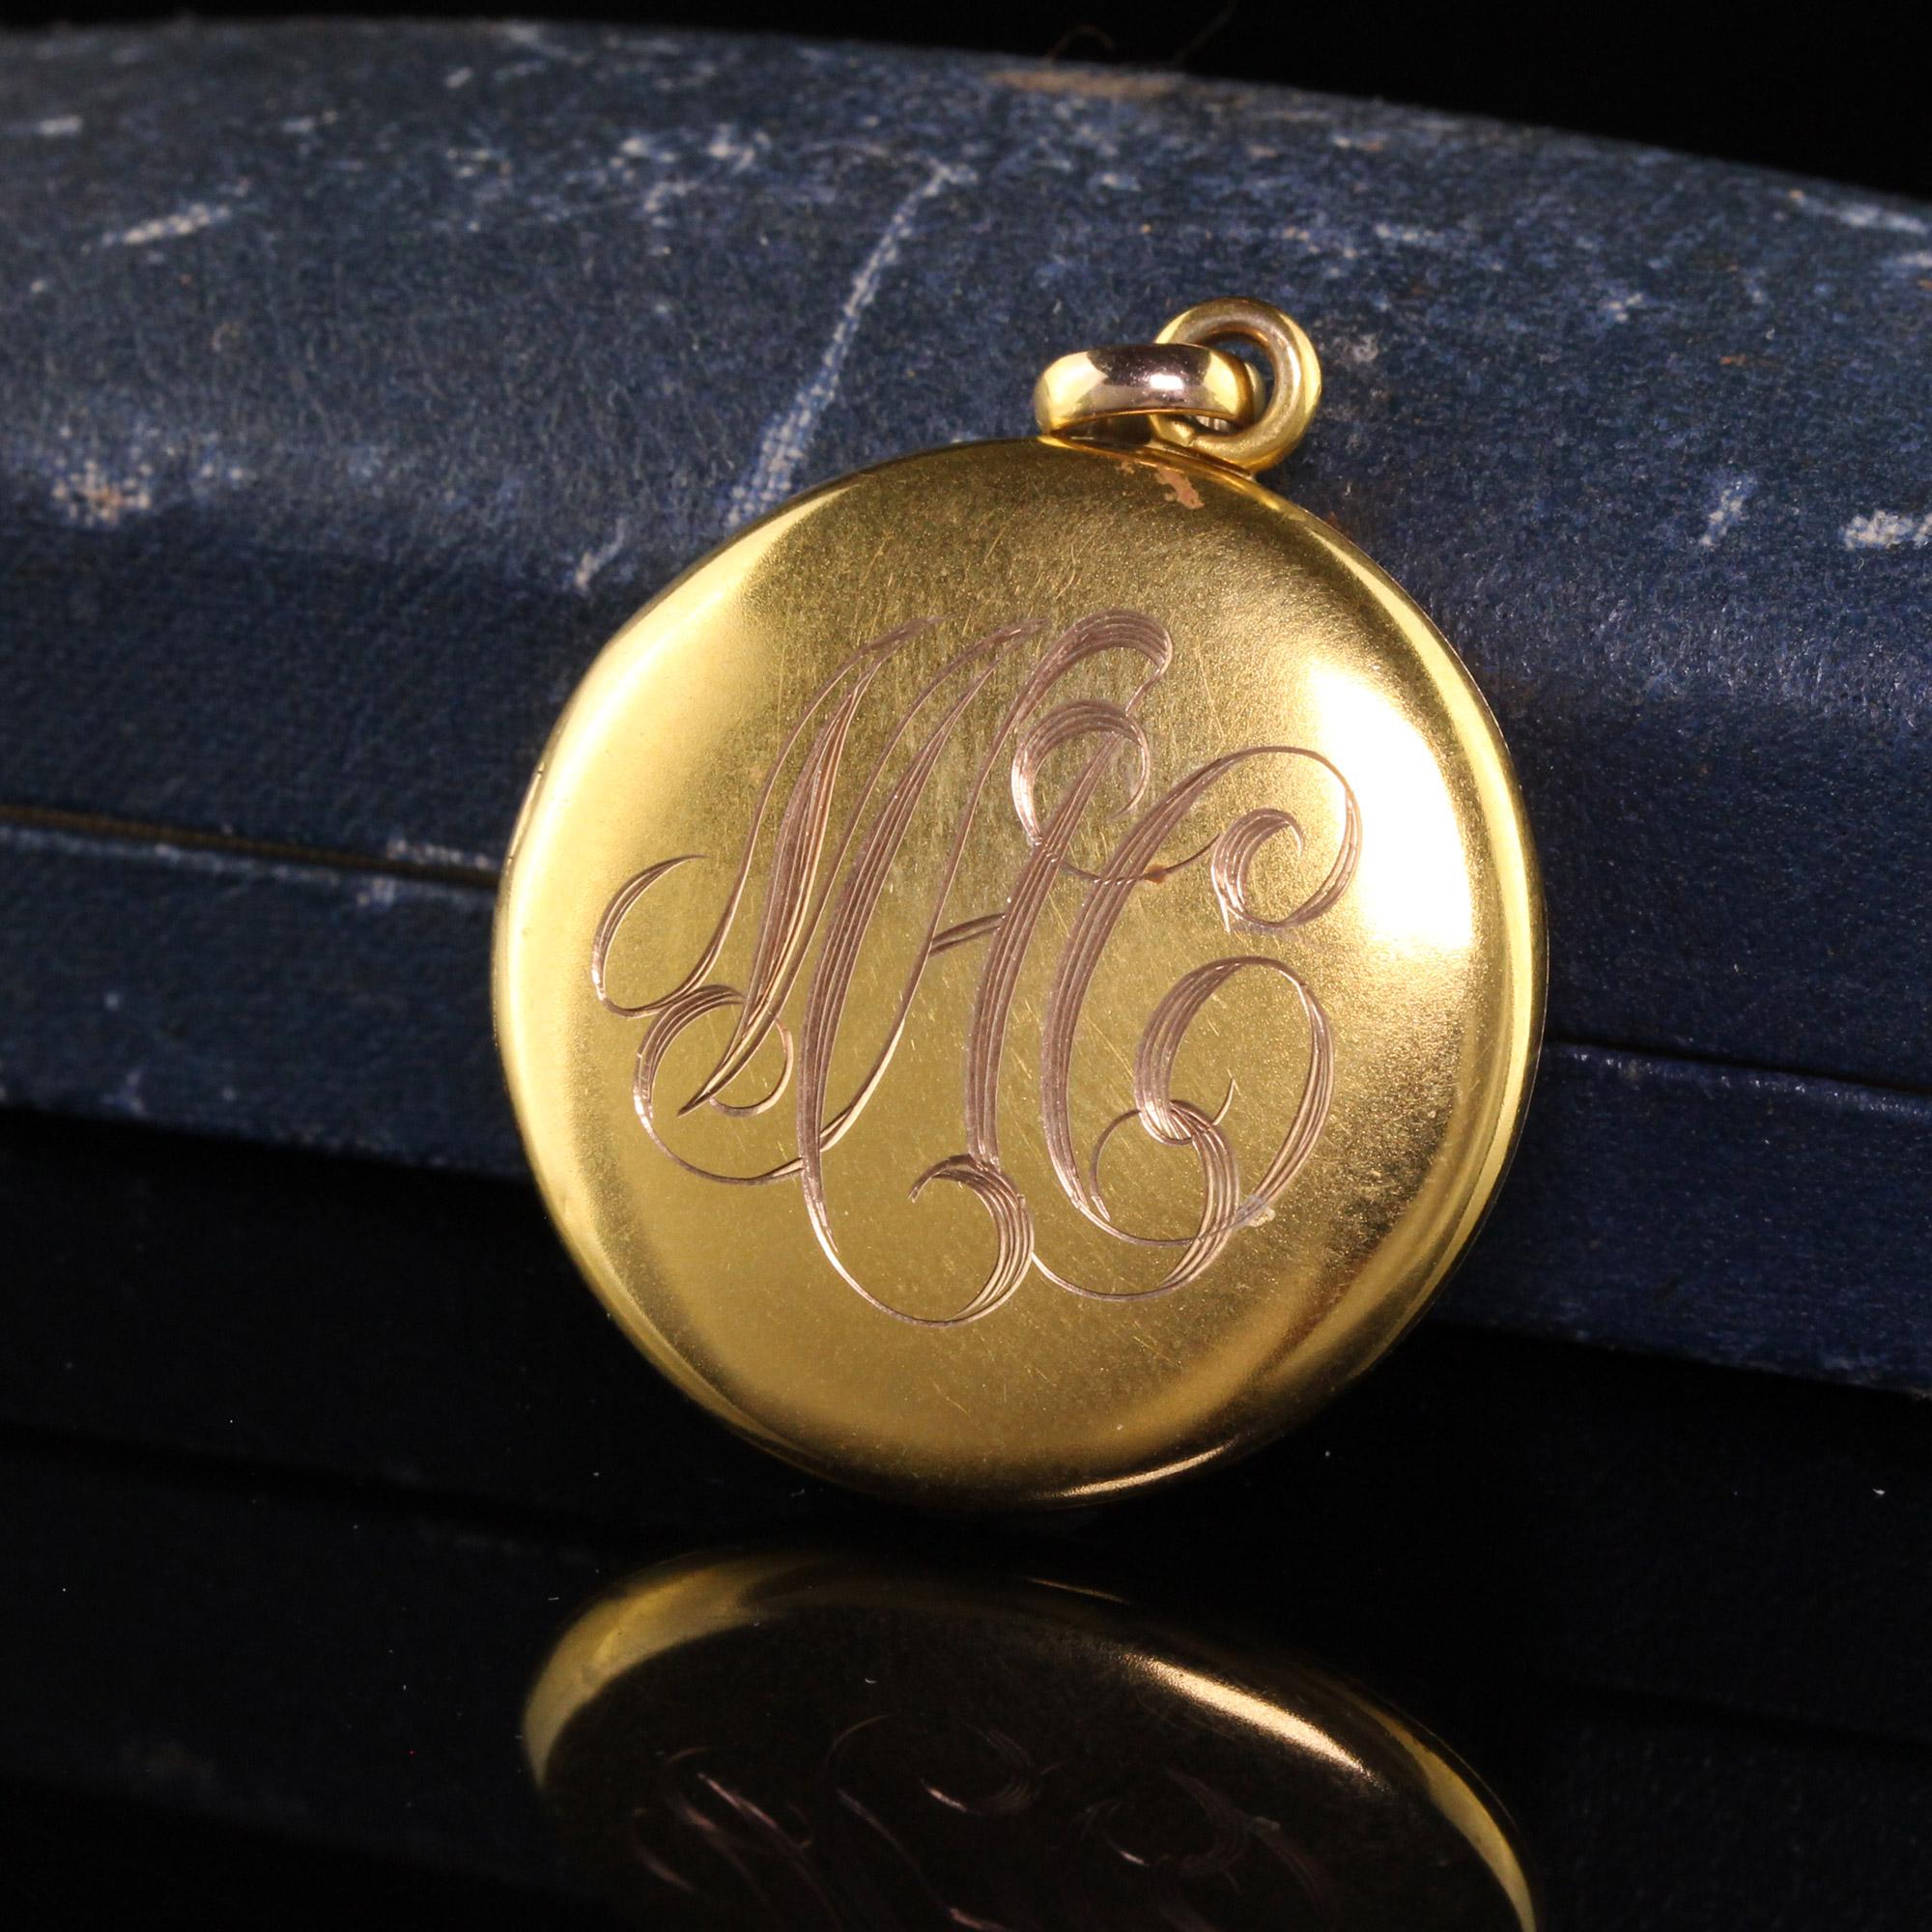 Beautiful Antique Victorian 10K Yellow Gold Engraved Locket Pendant. This classic locket is crafted in 10k yellow gold. The locket is plain and has an engraving of the previous owners initials on one side. A very beautiful and classic locket.

Item